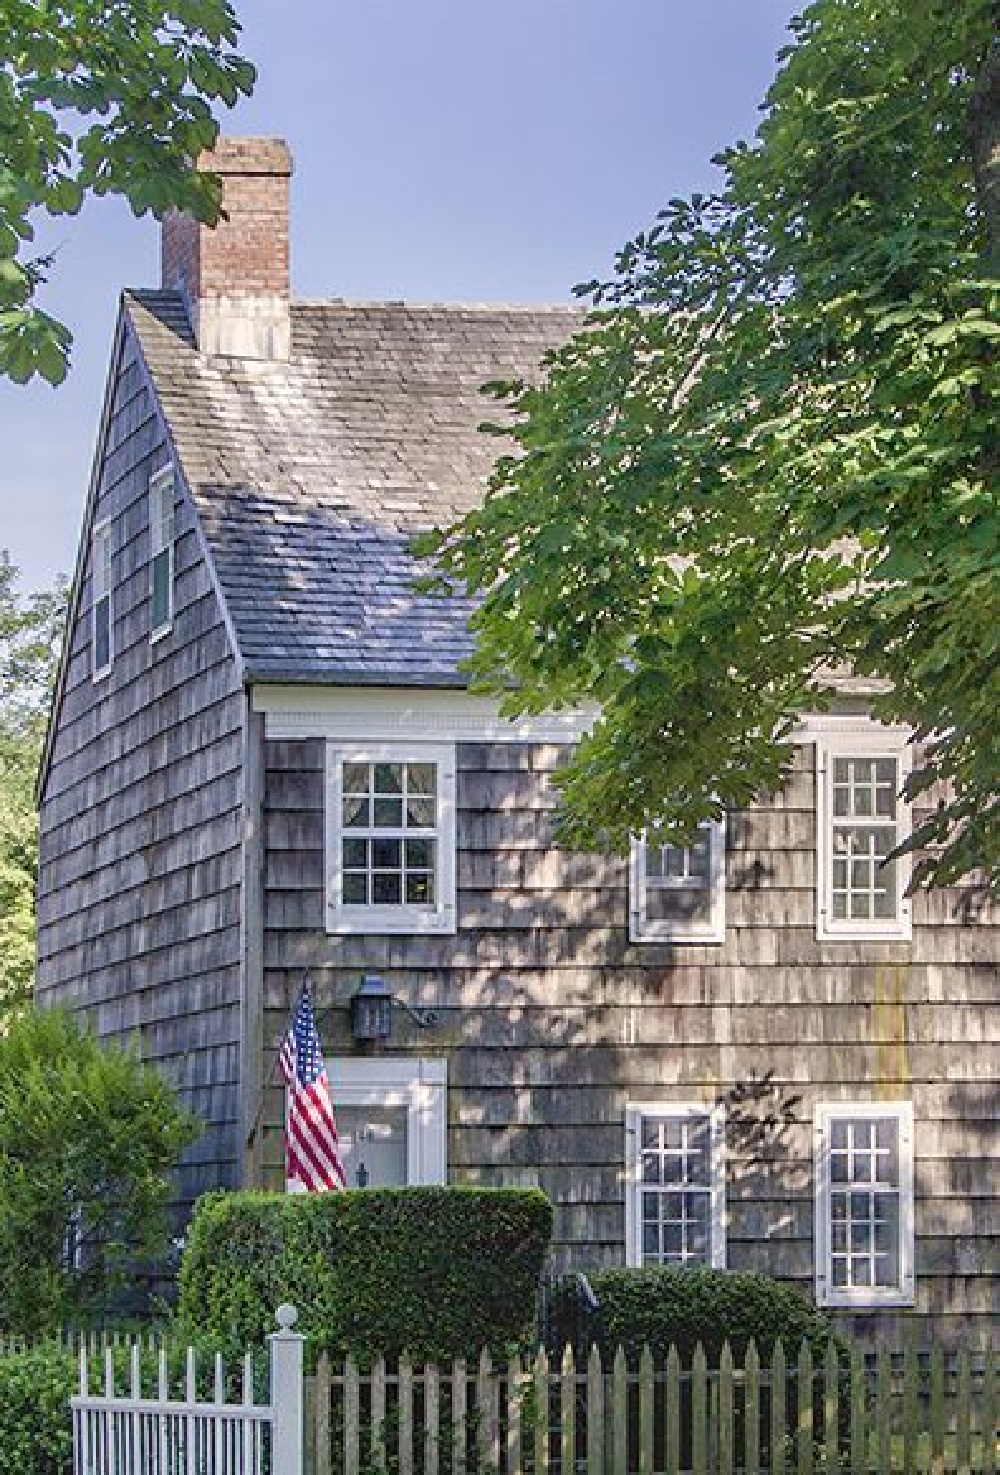 Main Street, East Hampton. A New England house exterior with American flag. COME TOUR MORE Nantucket Style Chic & Summer Vibes! #nantucket #interiordesign #designinspiration #summerliving #coastalstyle